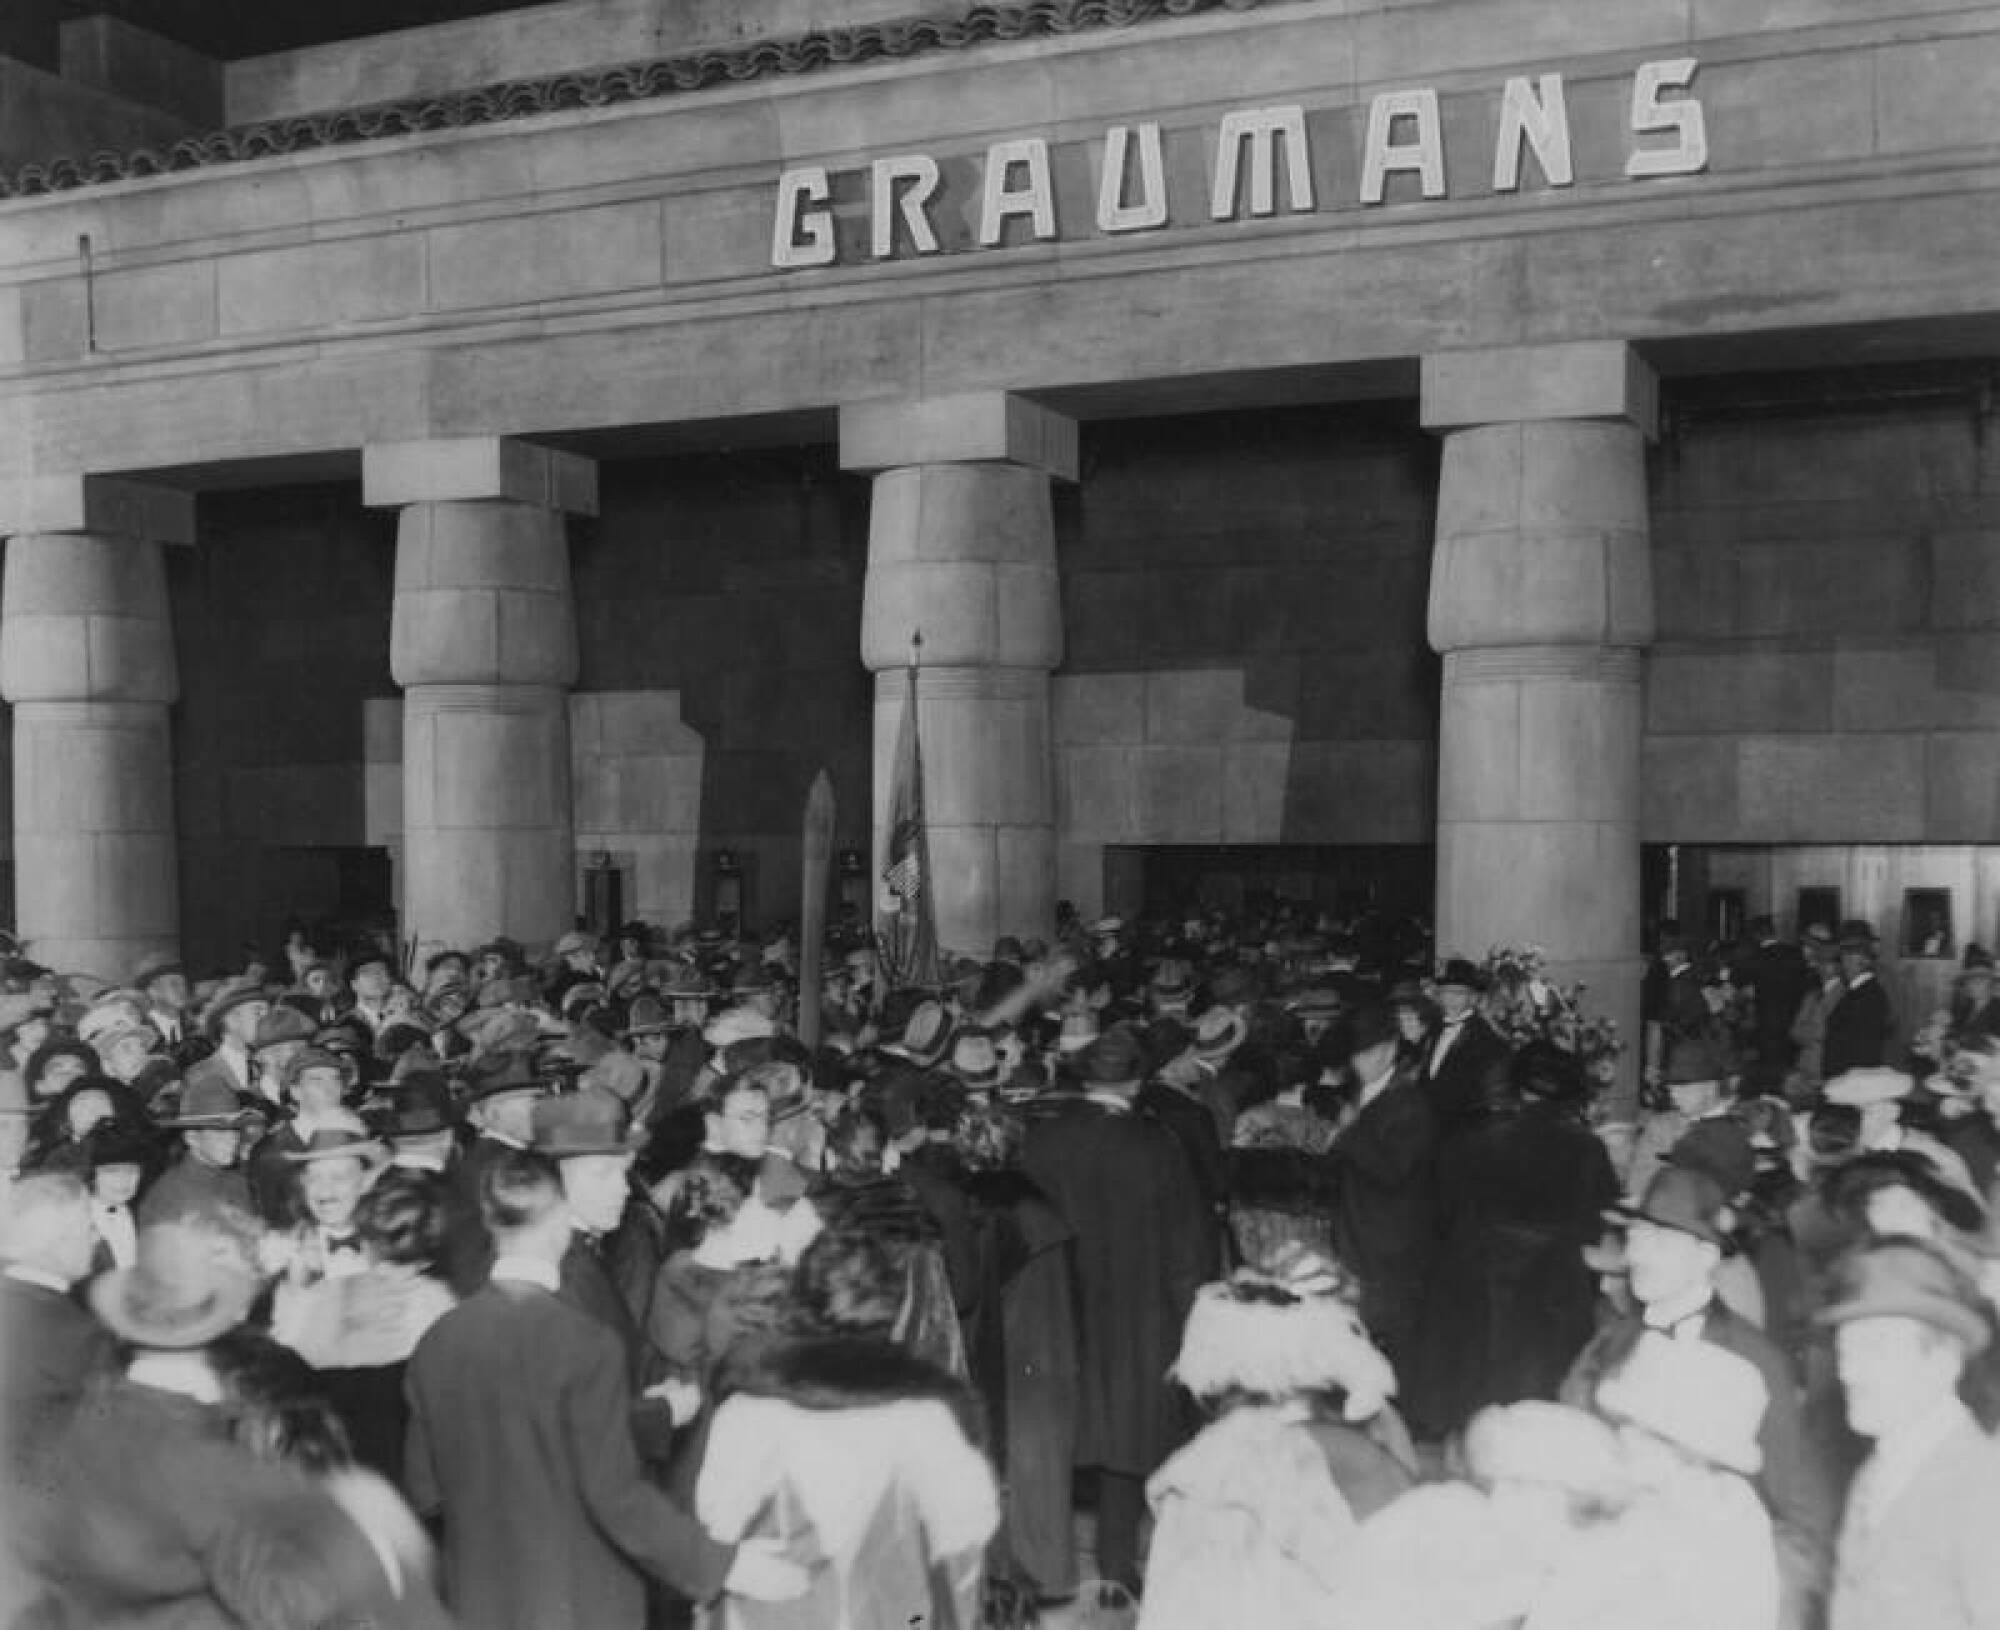 A crowd gathers in the forecourt of a movie palace.